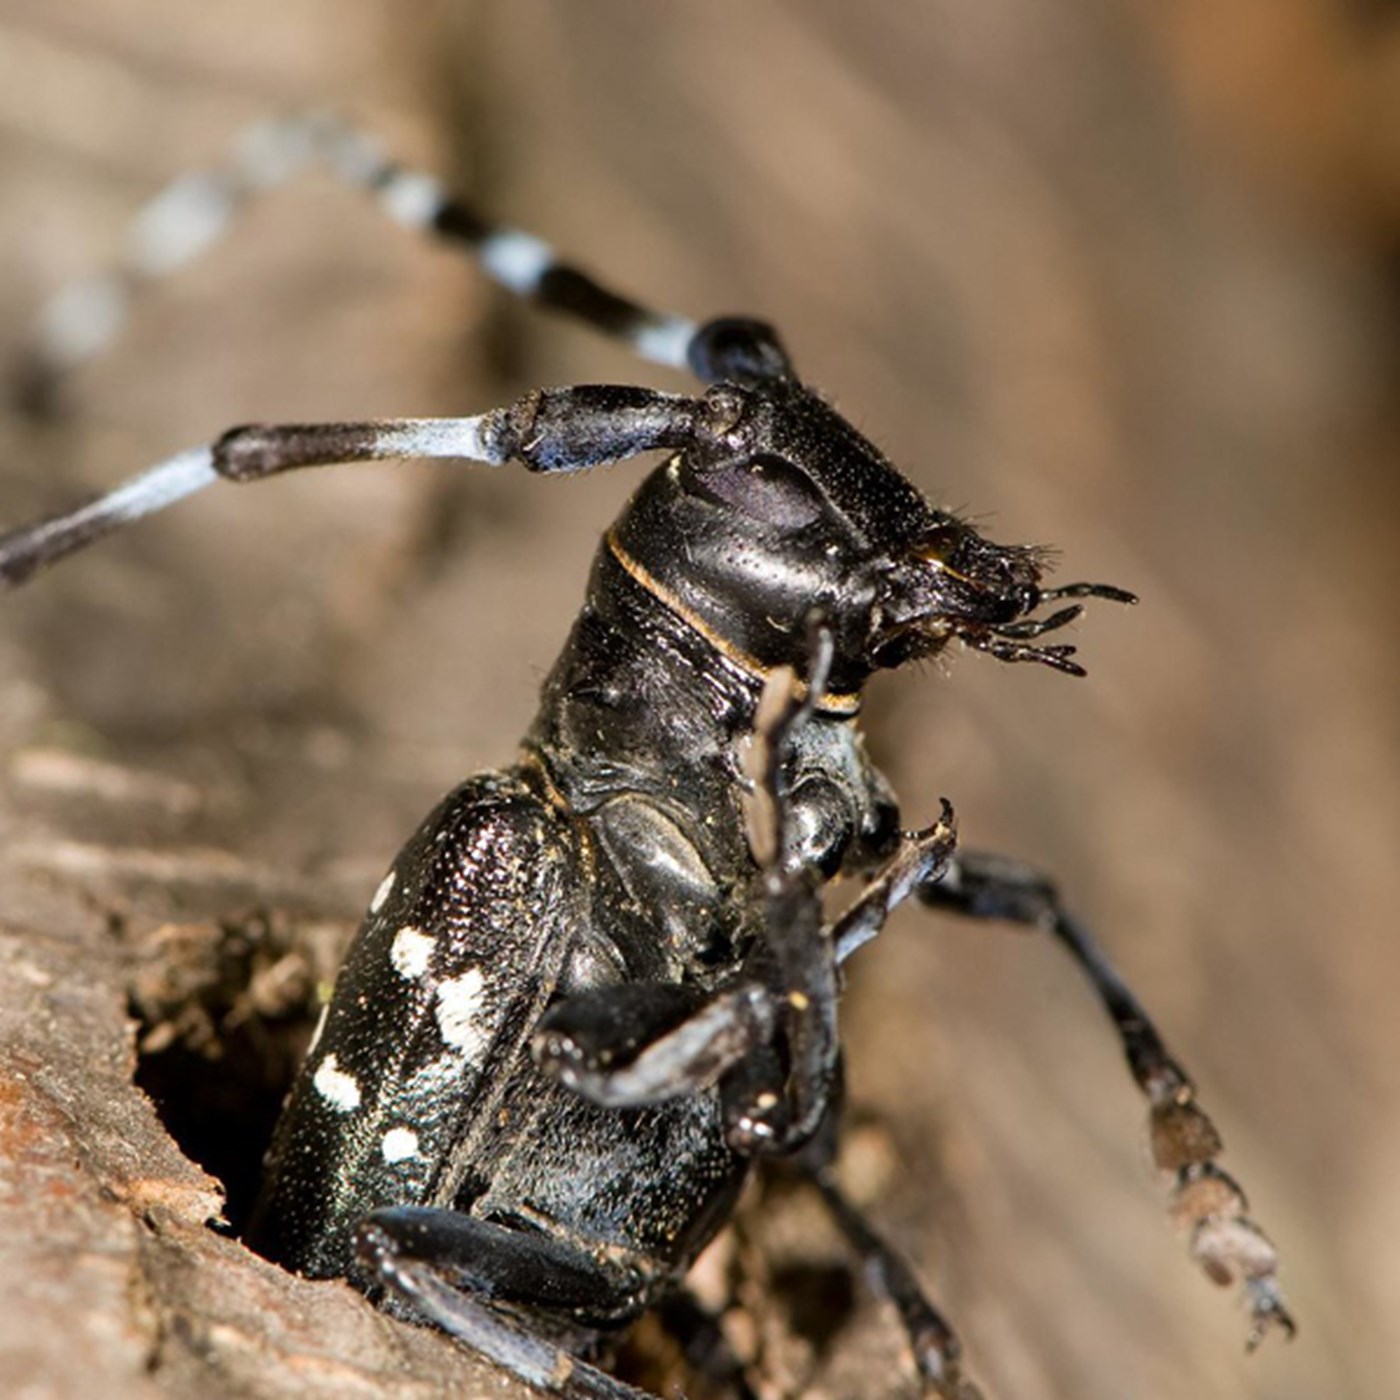 describe the case study of the asian longhorned beetle